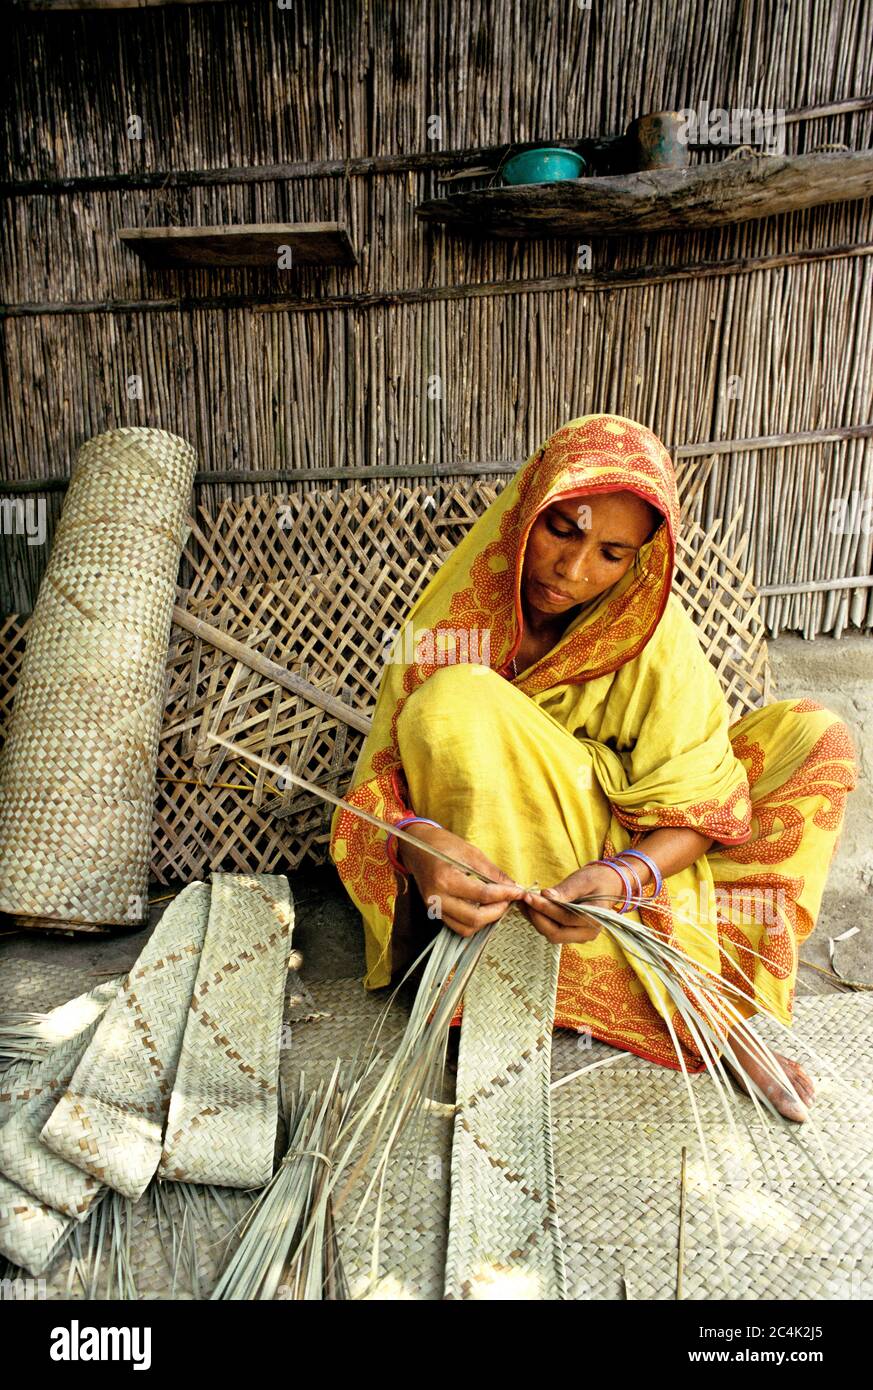 A woman works with the stems of some palm or coconut leaves used